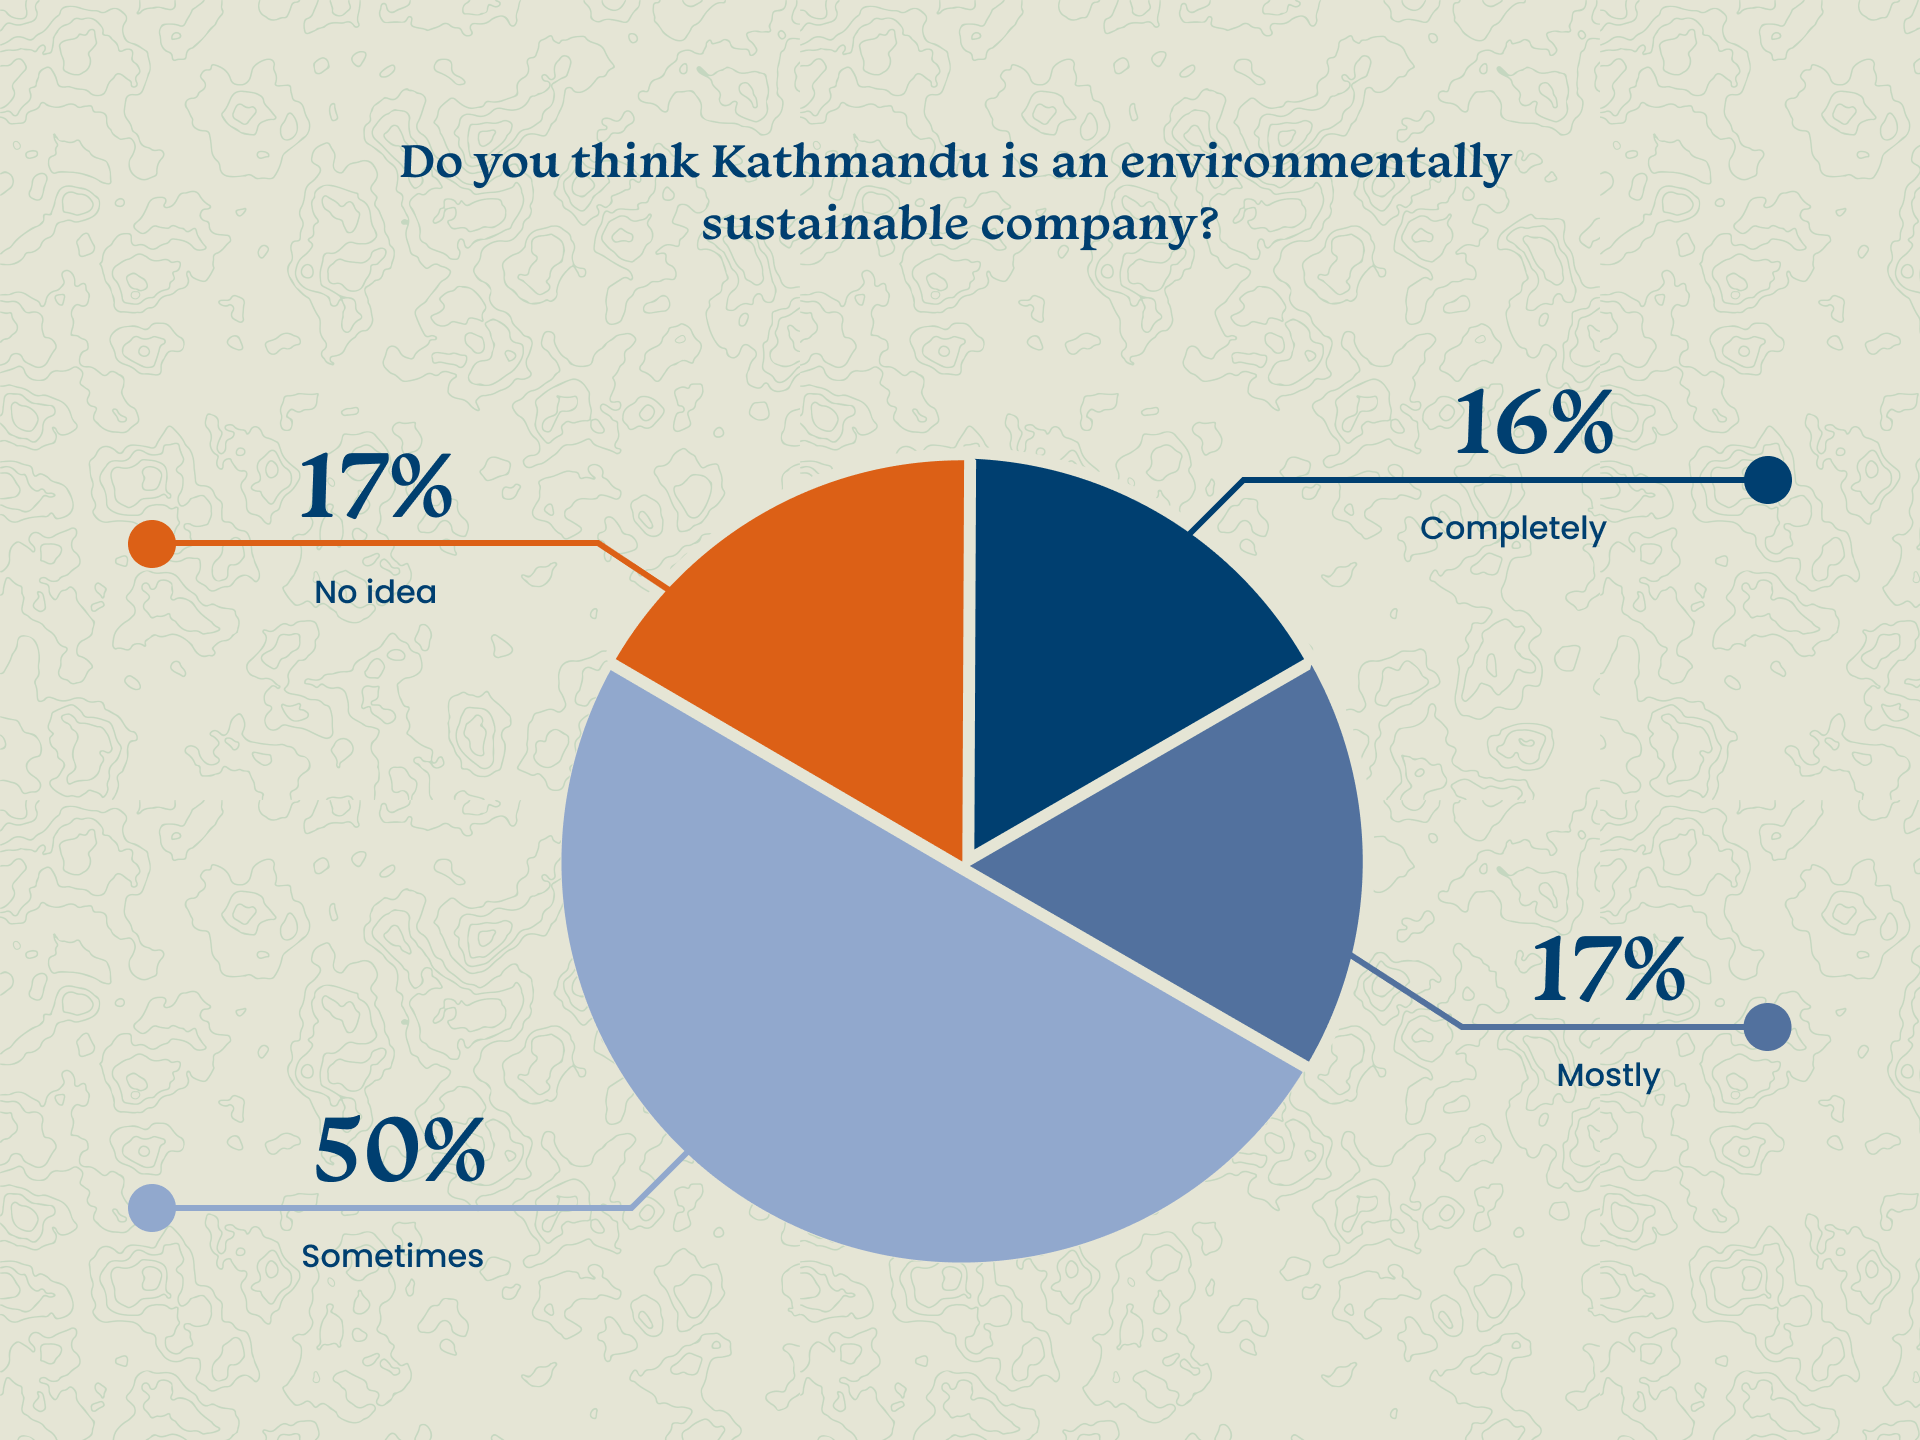 Survey asking Do you think Kathmandu is an environmentally sustainable company? 16% responded completely, 17% responded mostly, 50% responded sometimes, and 17% responded with no idea